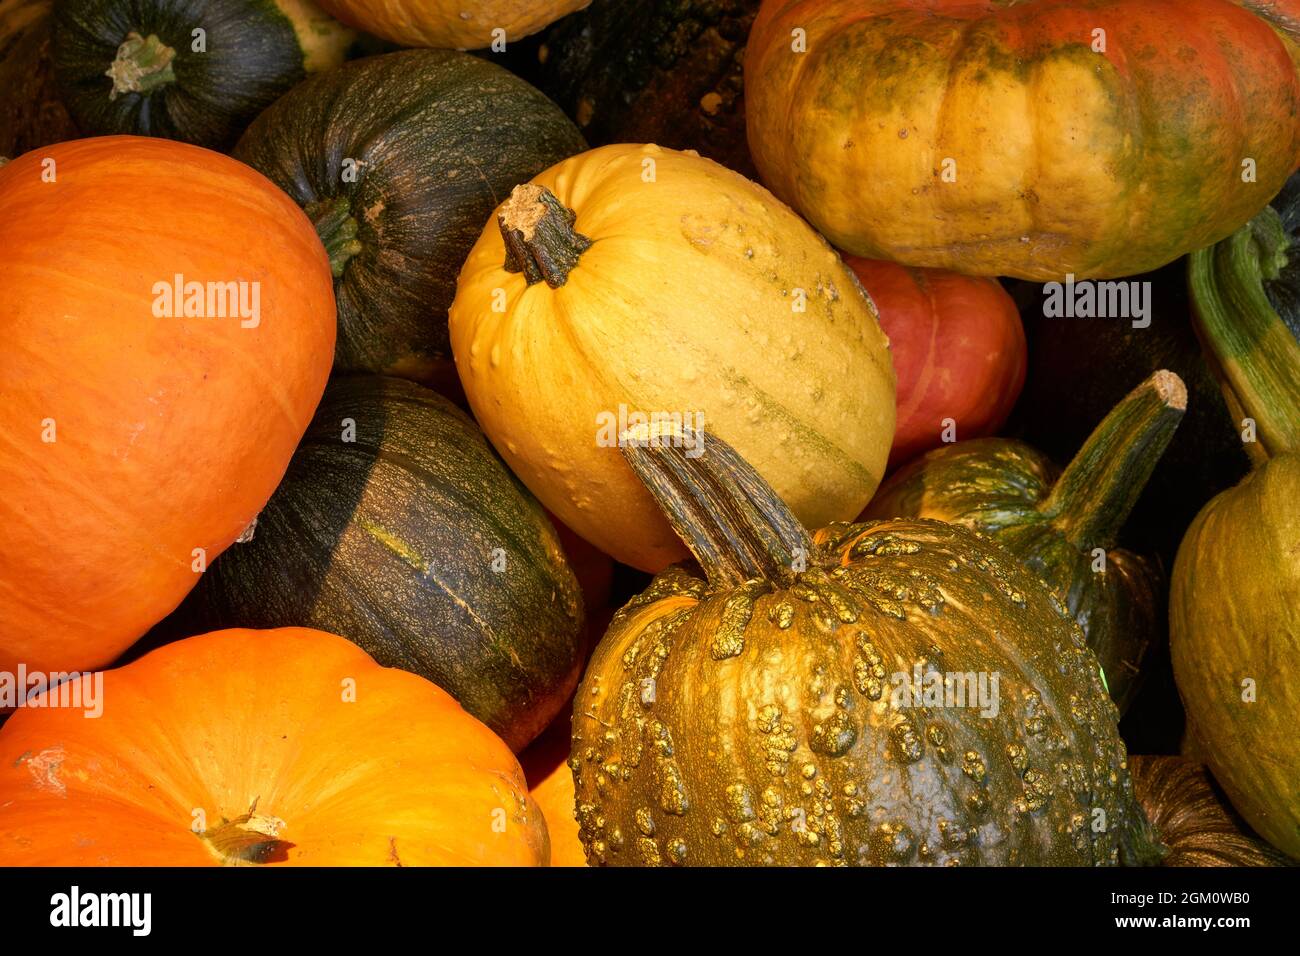 Closeup of a pile of pumpkins of various types, sizes, and colors Stock Photo